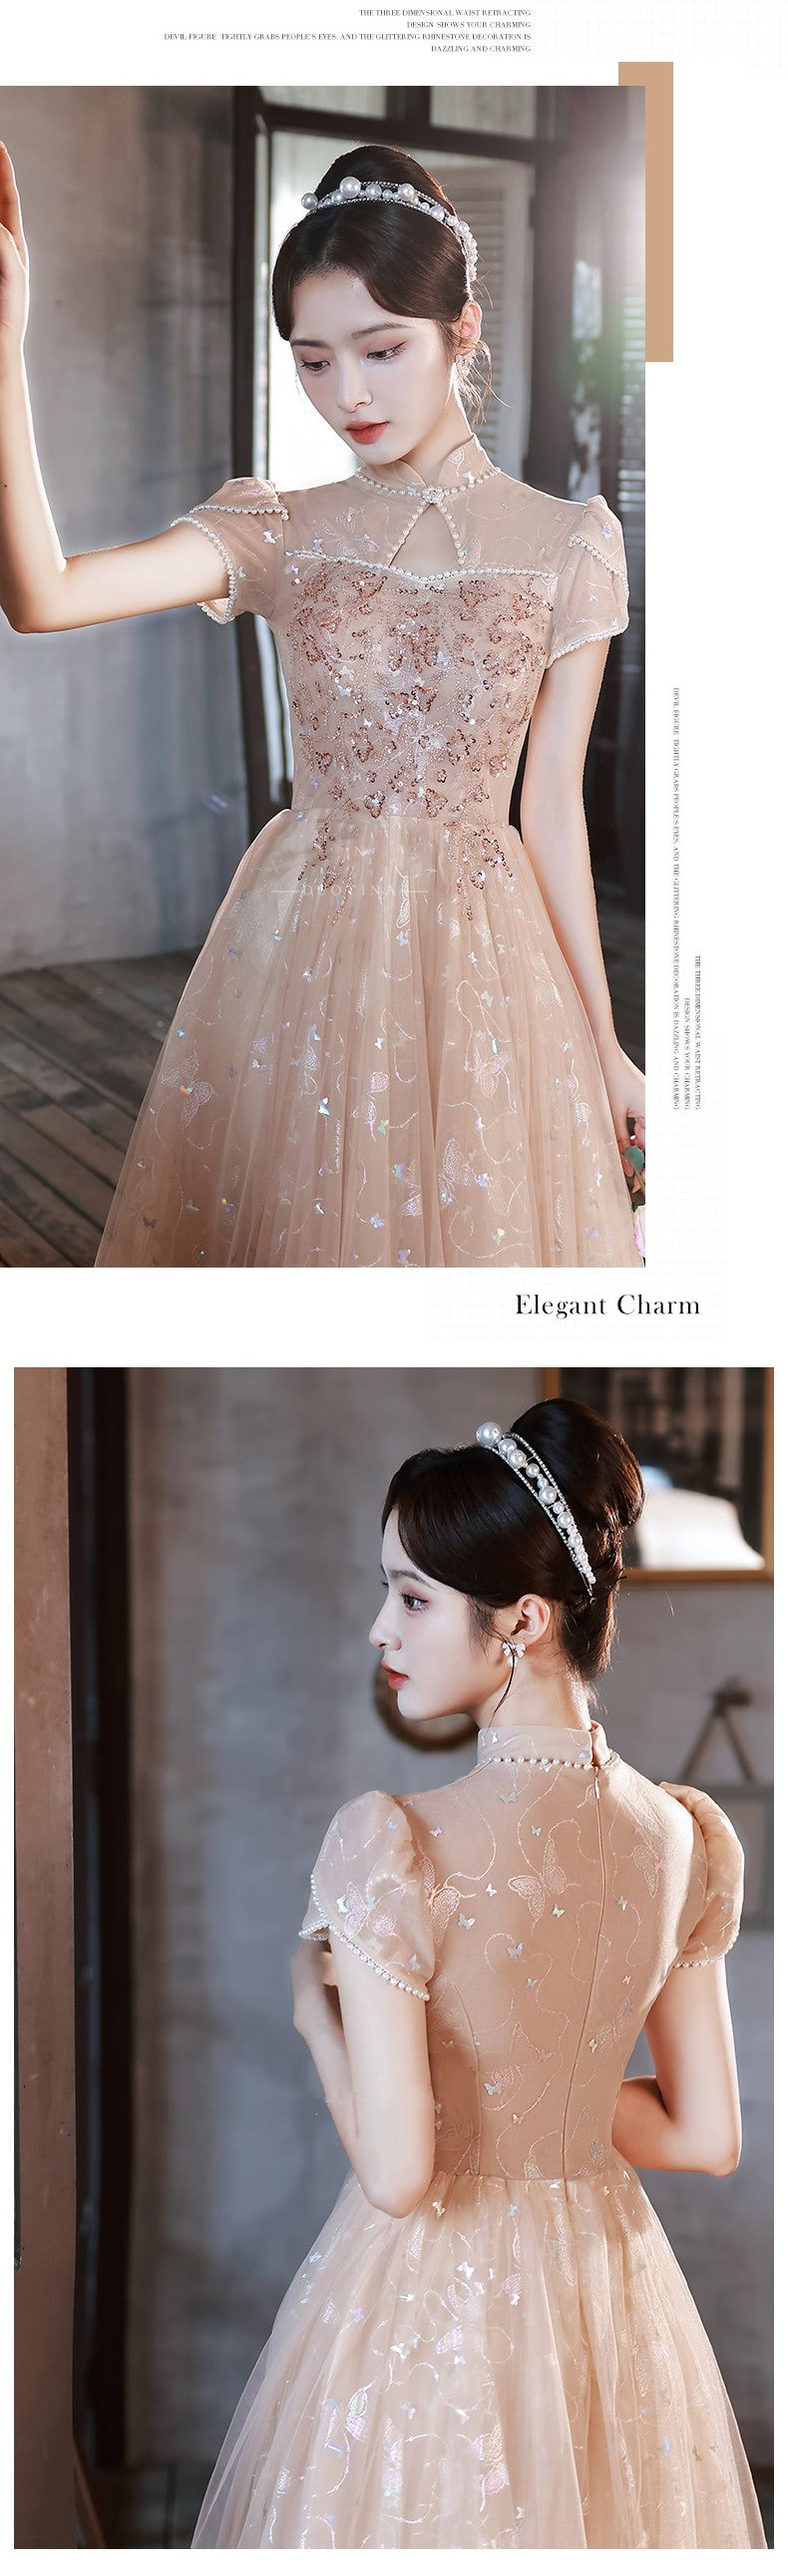 Aesthetic-Party-Outfit-Charming-Formal-Prom-Banquet-Long-Dress13.jpg